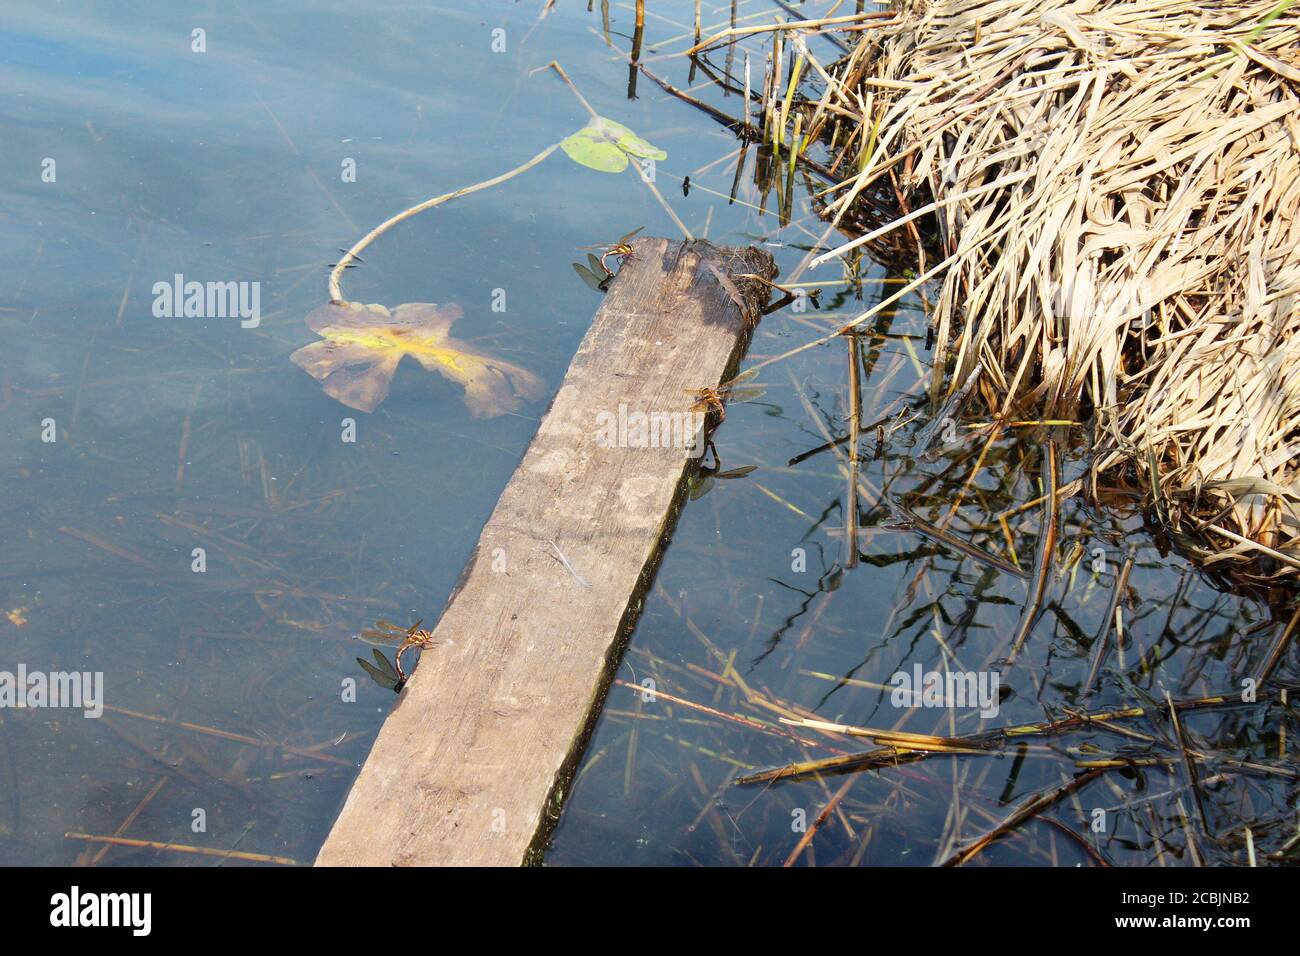 Golden dragonflies (Libellula needhami) sitting on a wooden plank next to dead reeds on the margins of Pickmere lake in Cheshire, England Stock Photo